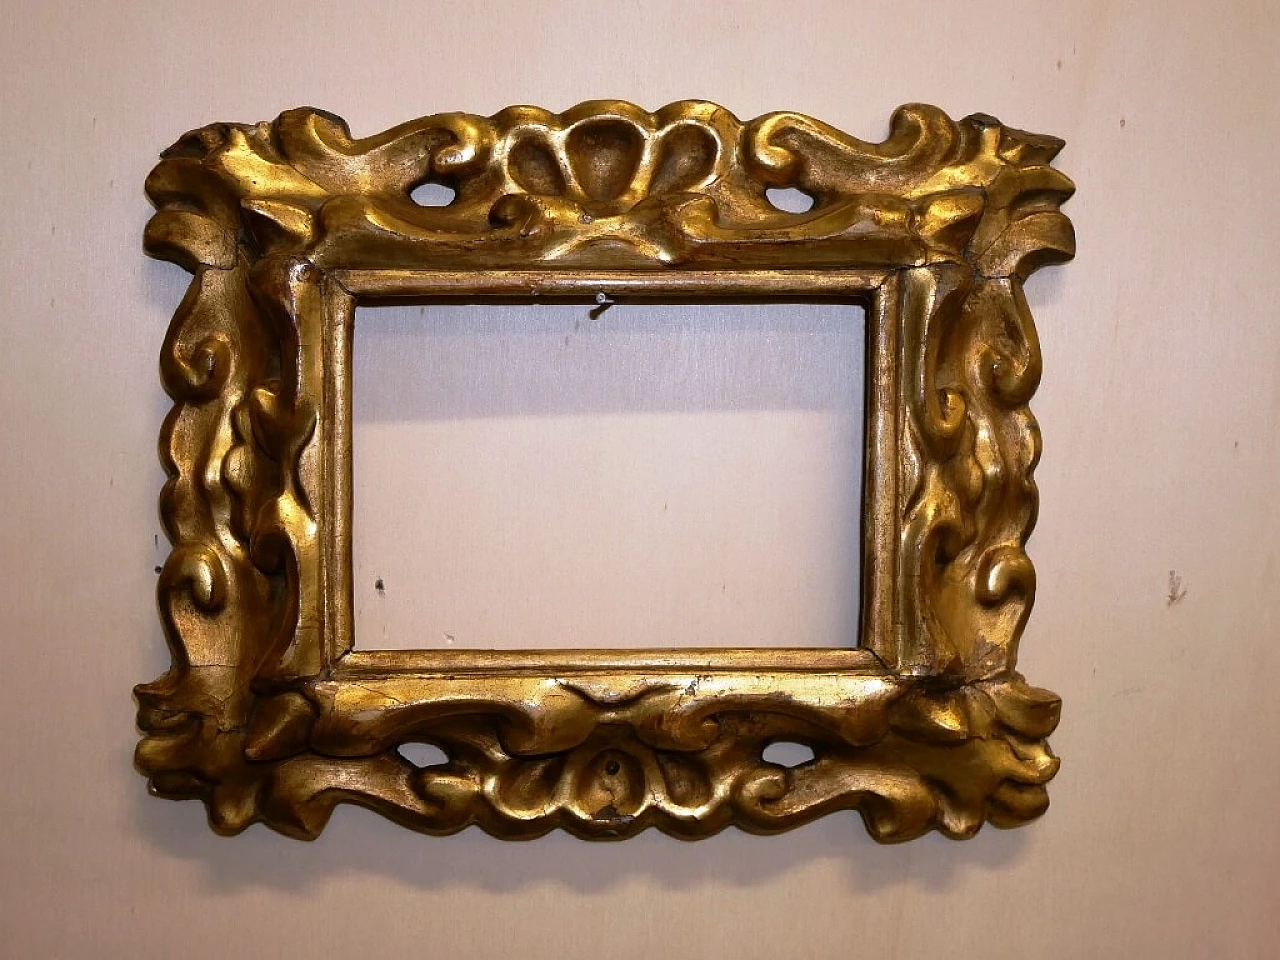 Carved and gilded frame, 18th century 1324765